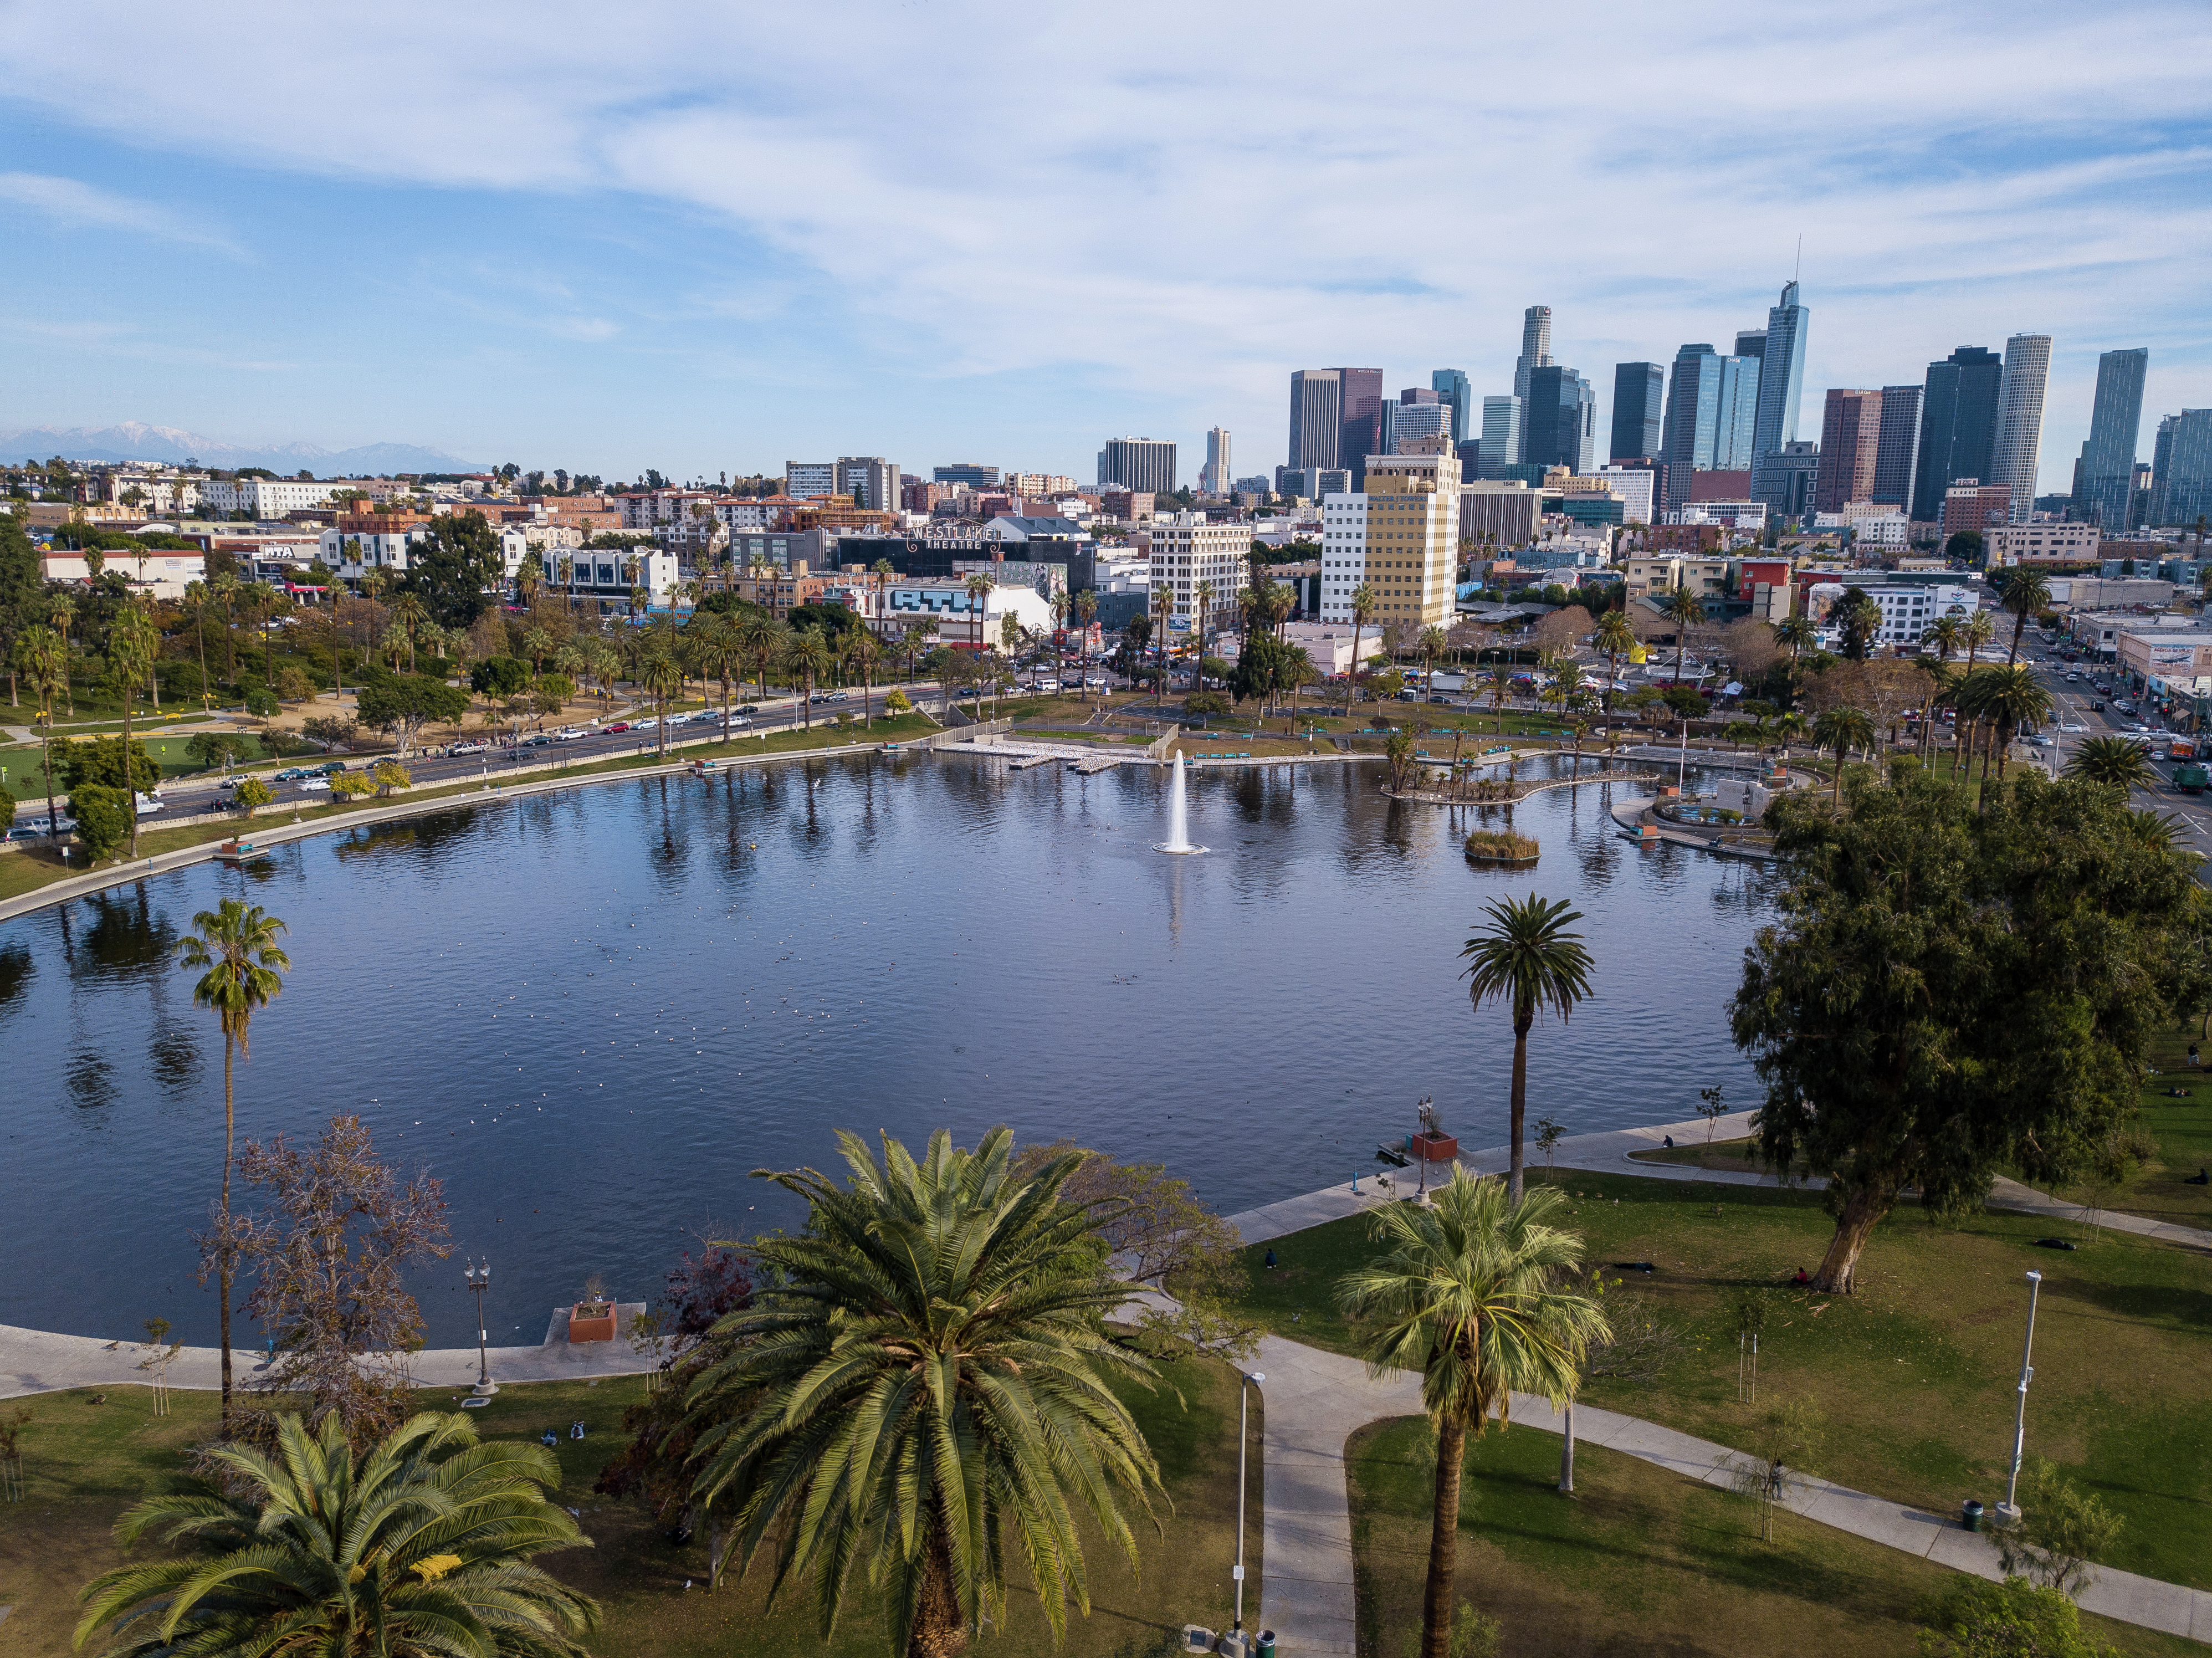 Plan launched to reconnect MacArthur Park across Wilshire Blvd.